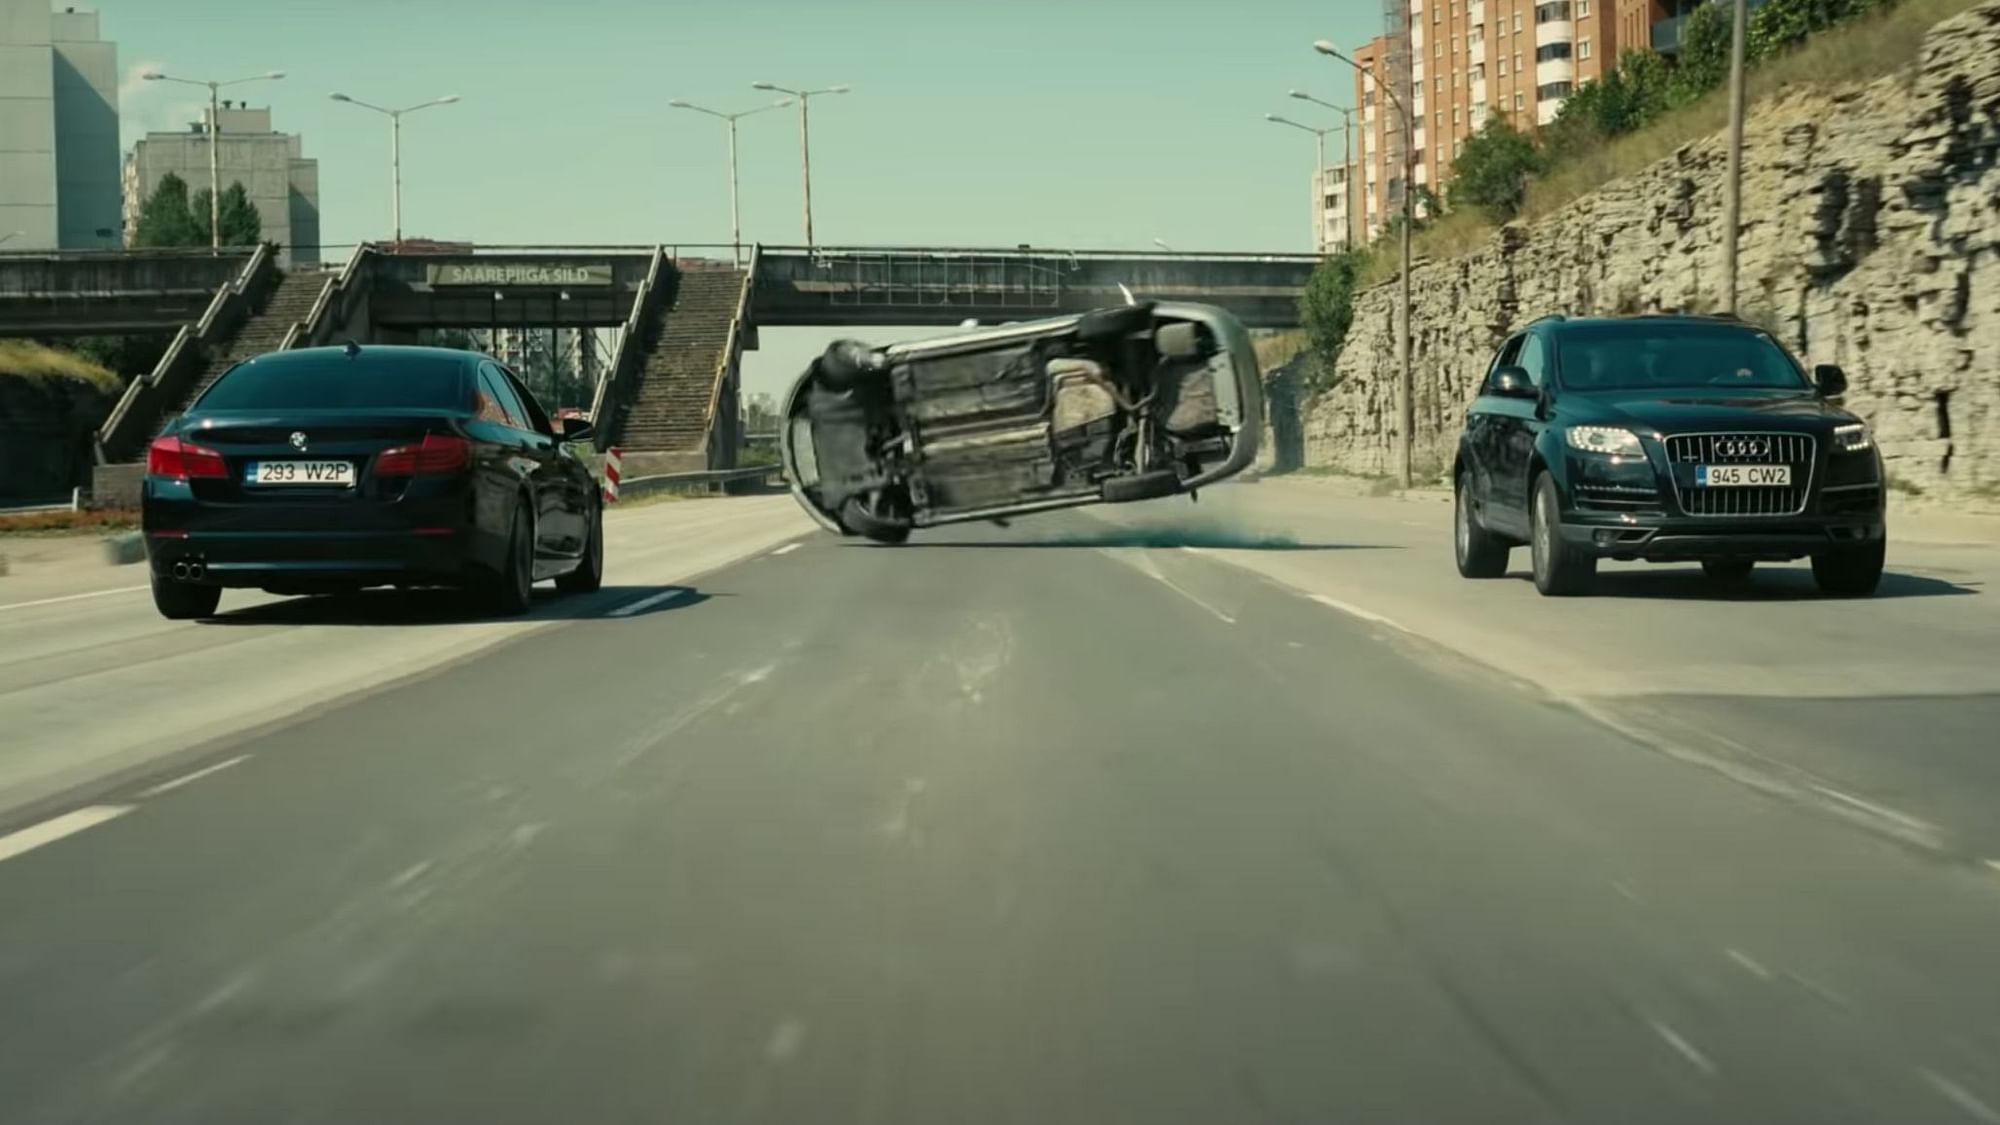 ‘Tenet’ has some crazy car chase scenes